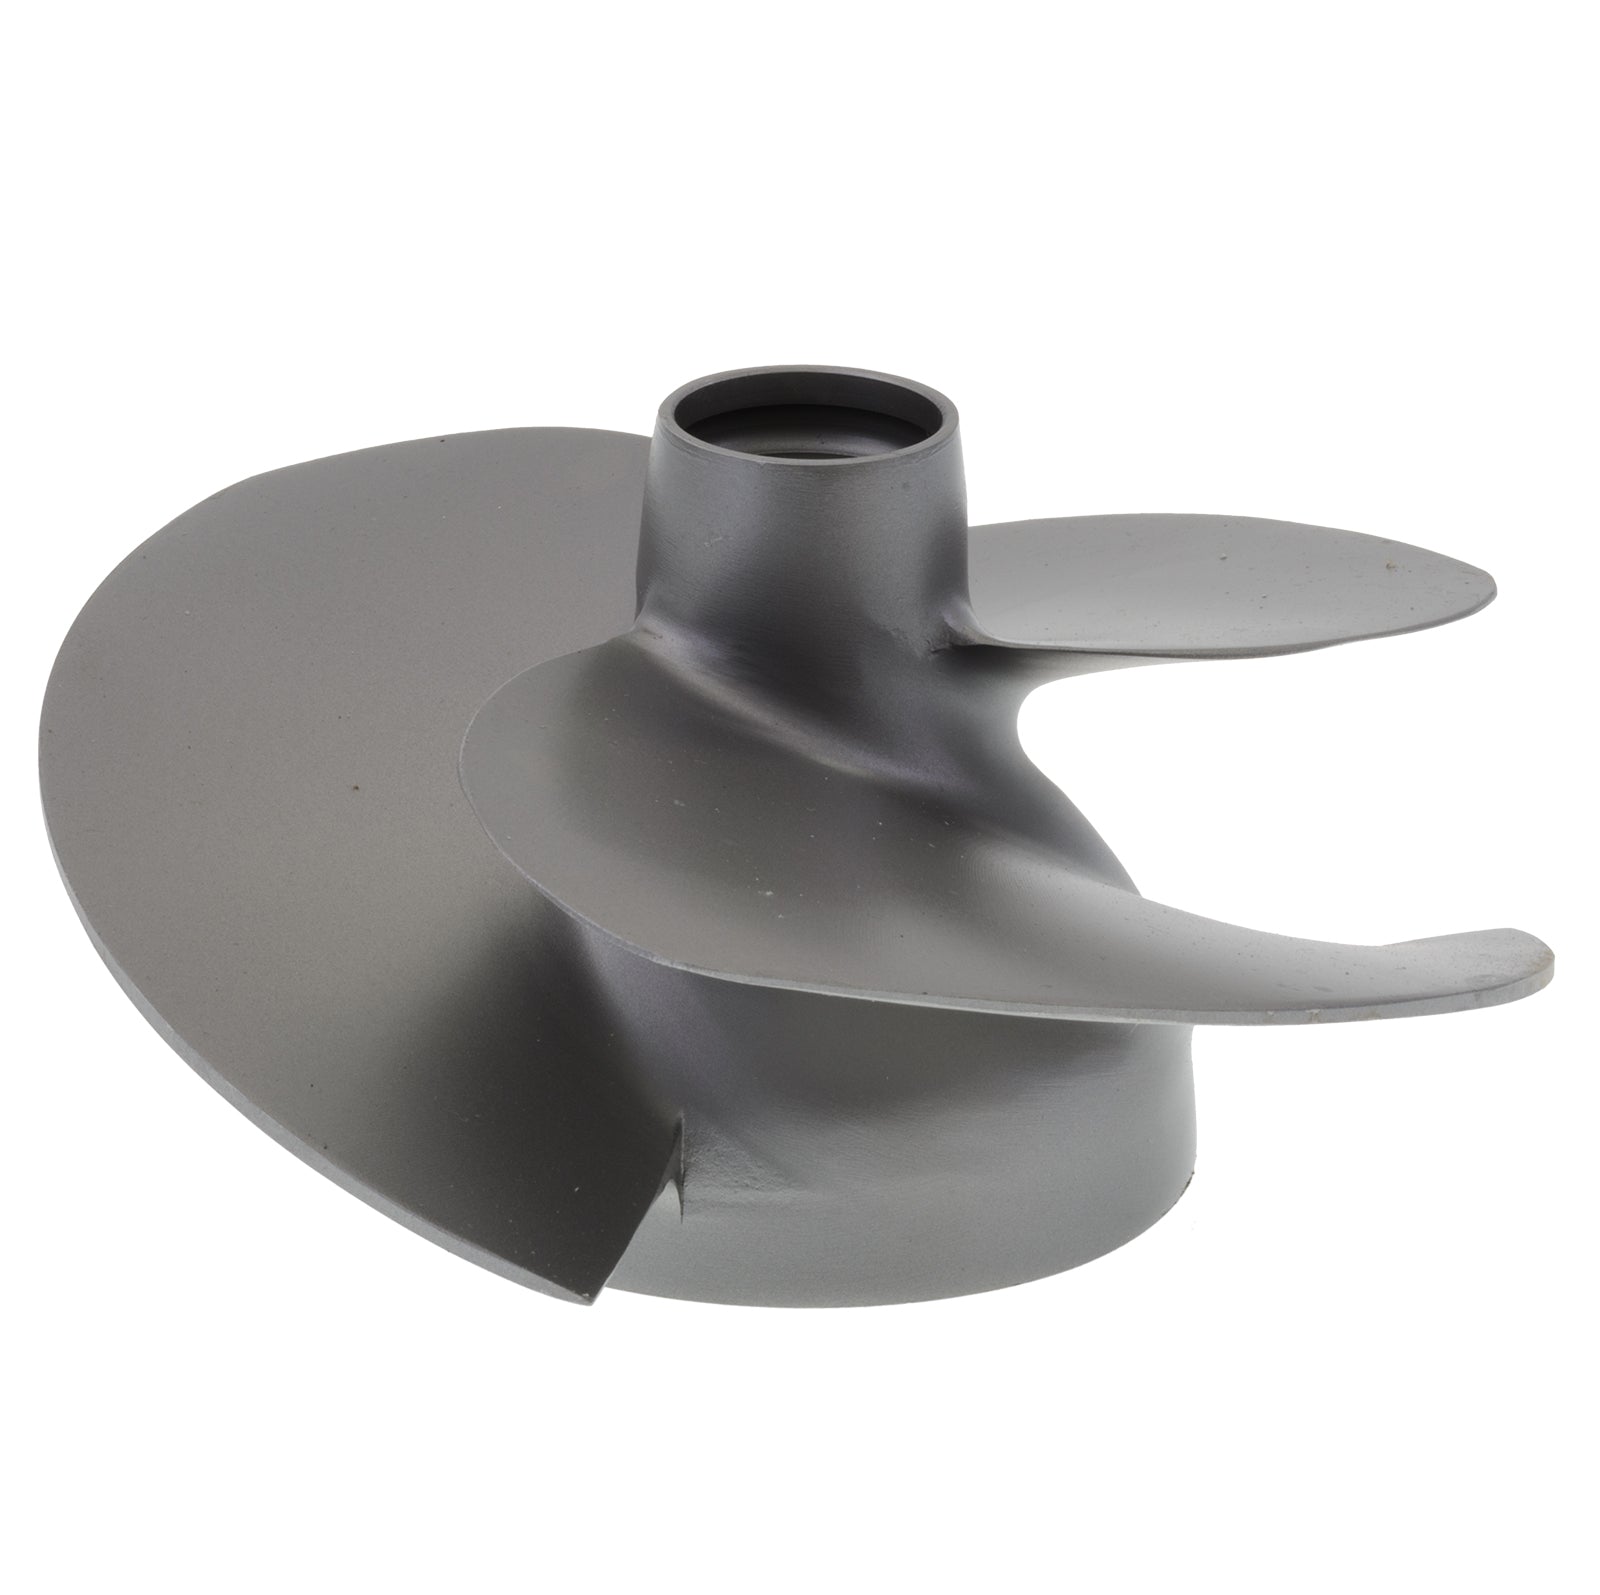 Impeller Solutions impellers and kits